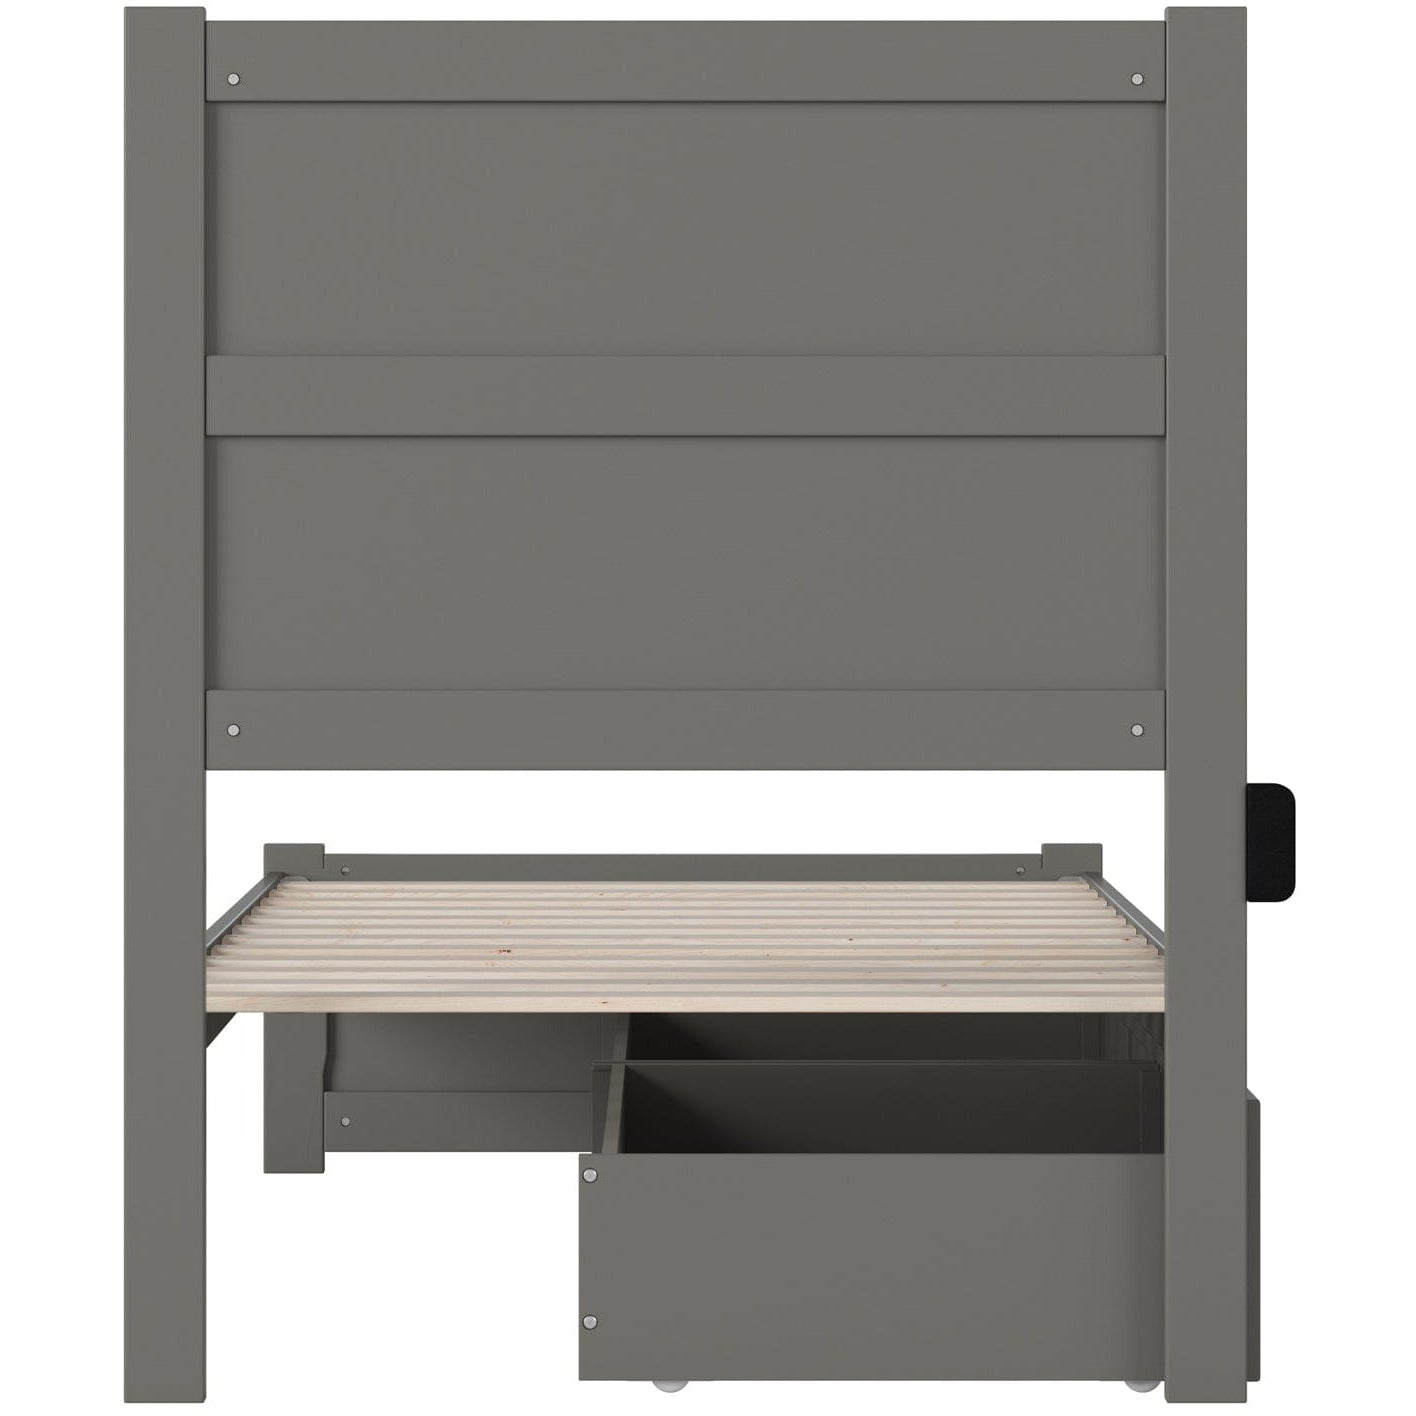 AFI Furnishings NoHo Twin Bed with Footboard and 2 Drawers in Grey AG9163329